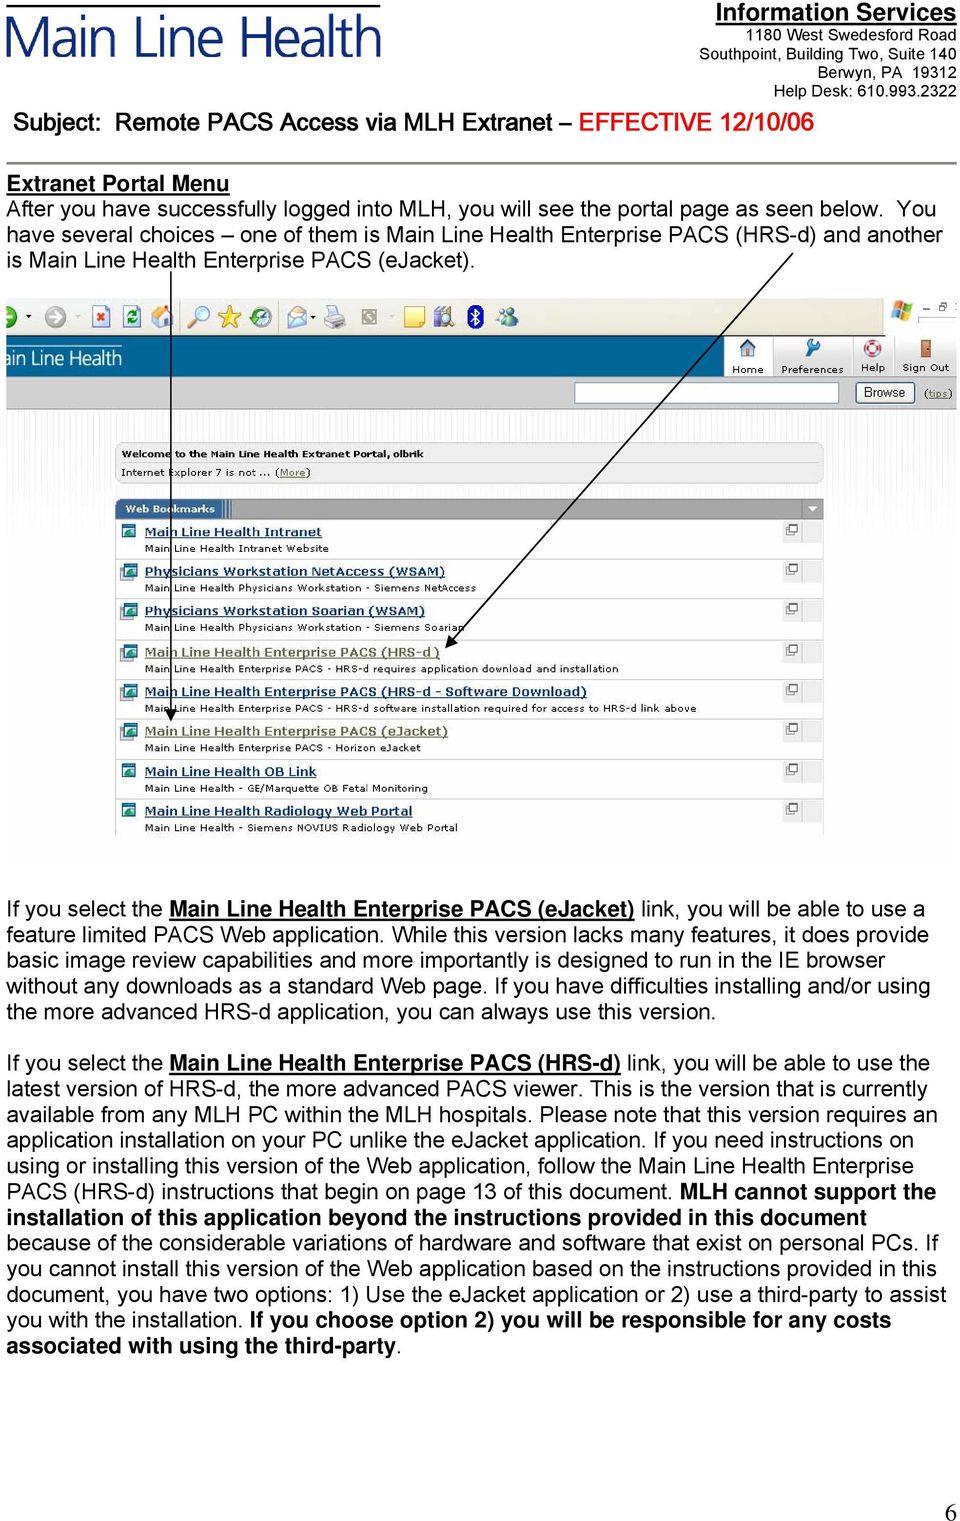 If you select the Main Line Health Enterprise PACS (ejacket) link, you will be able to use a feature limited PACS Web application.